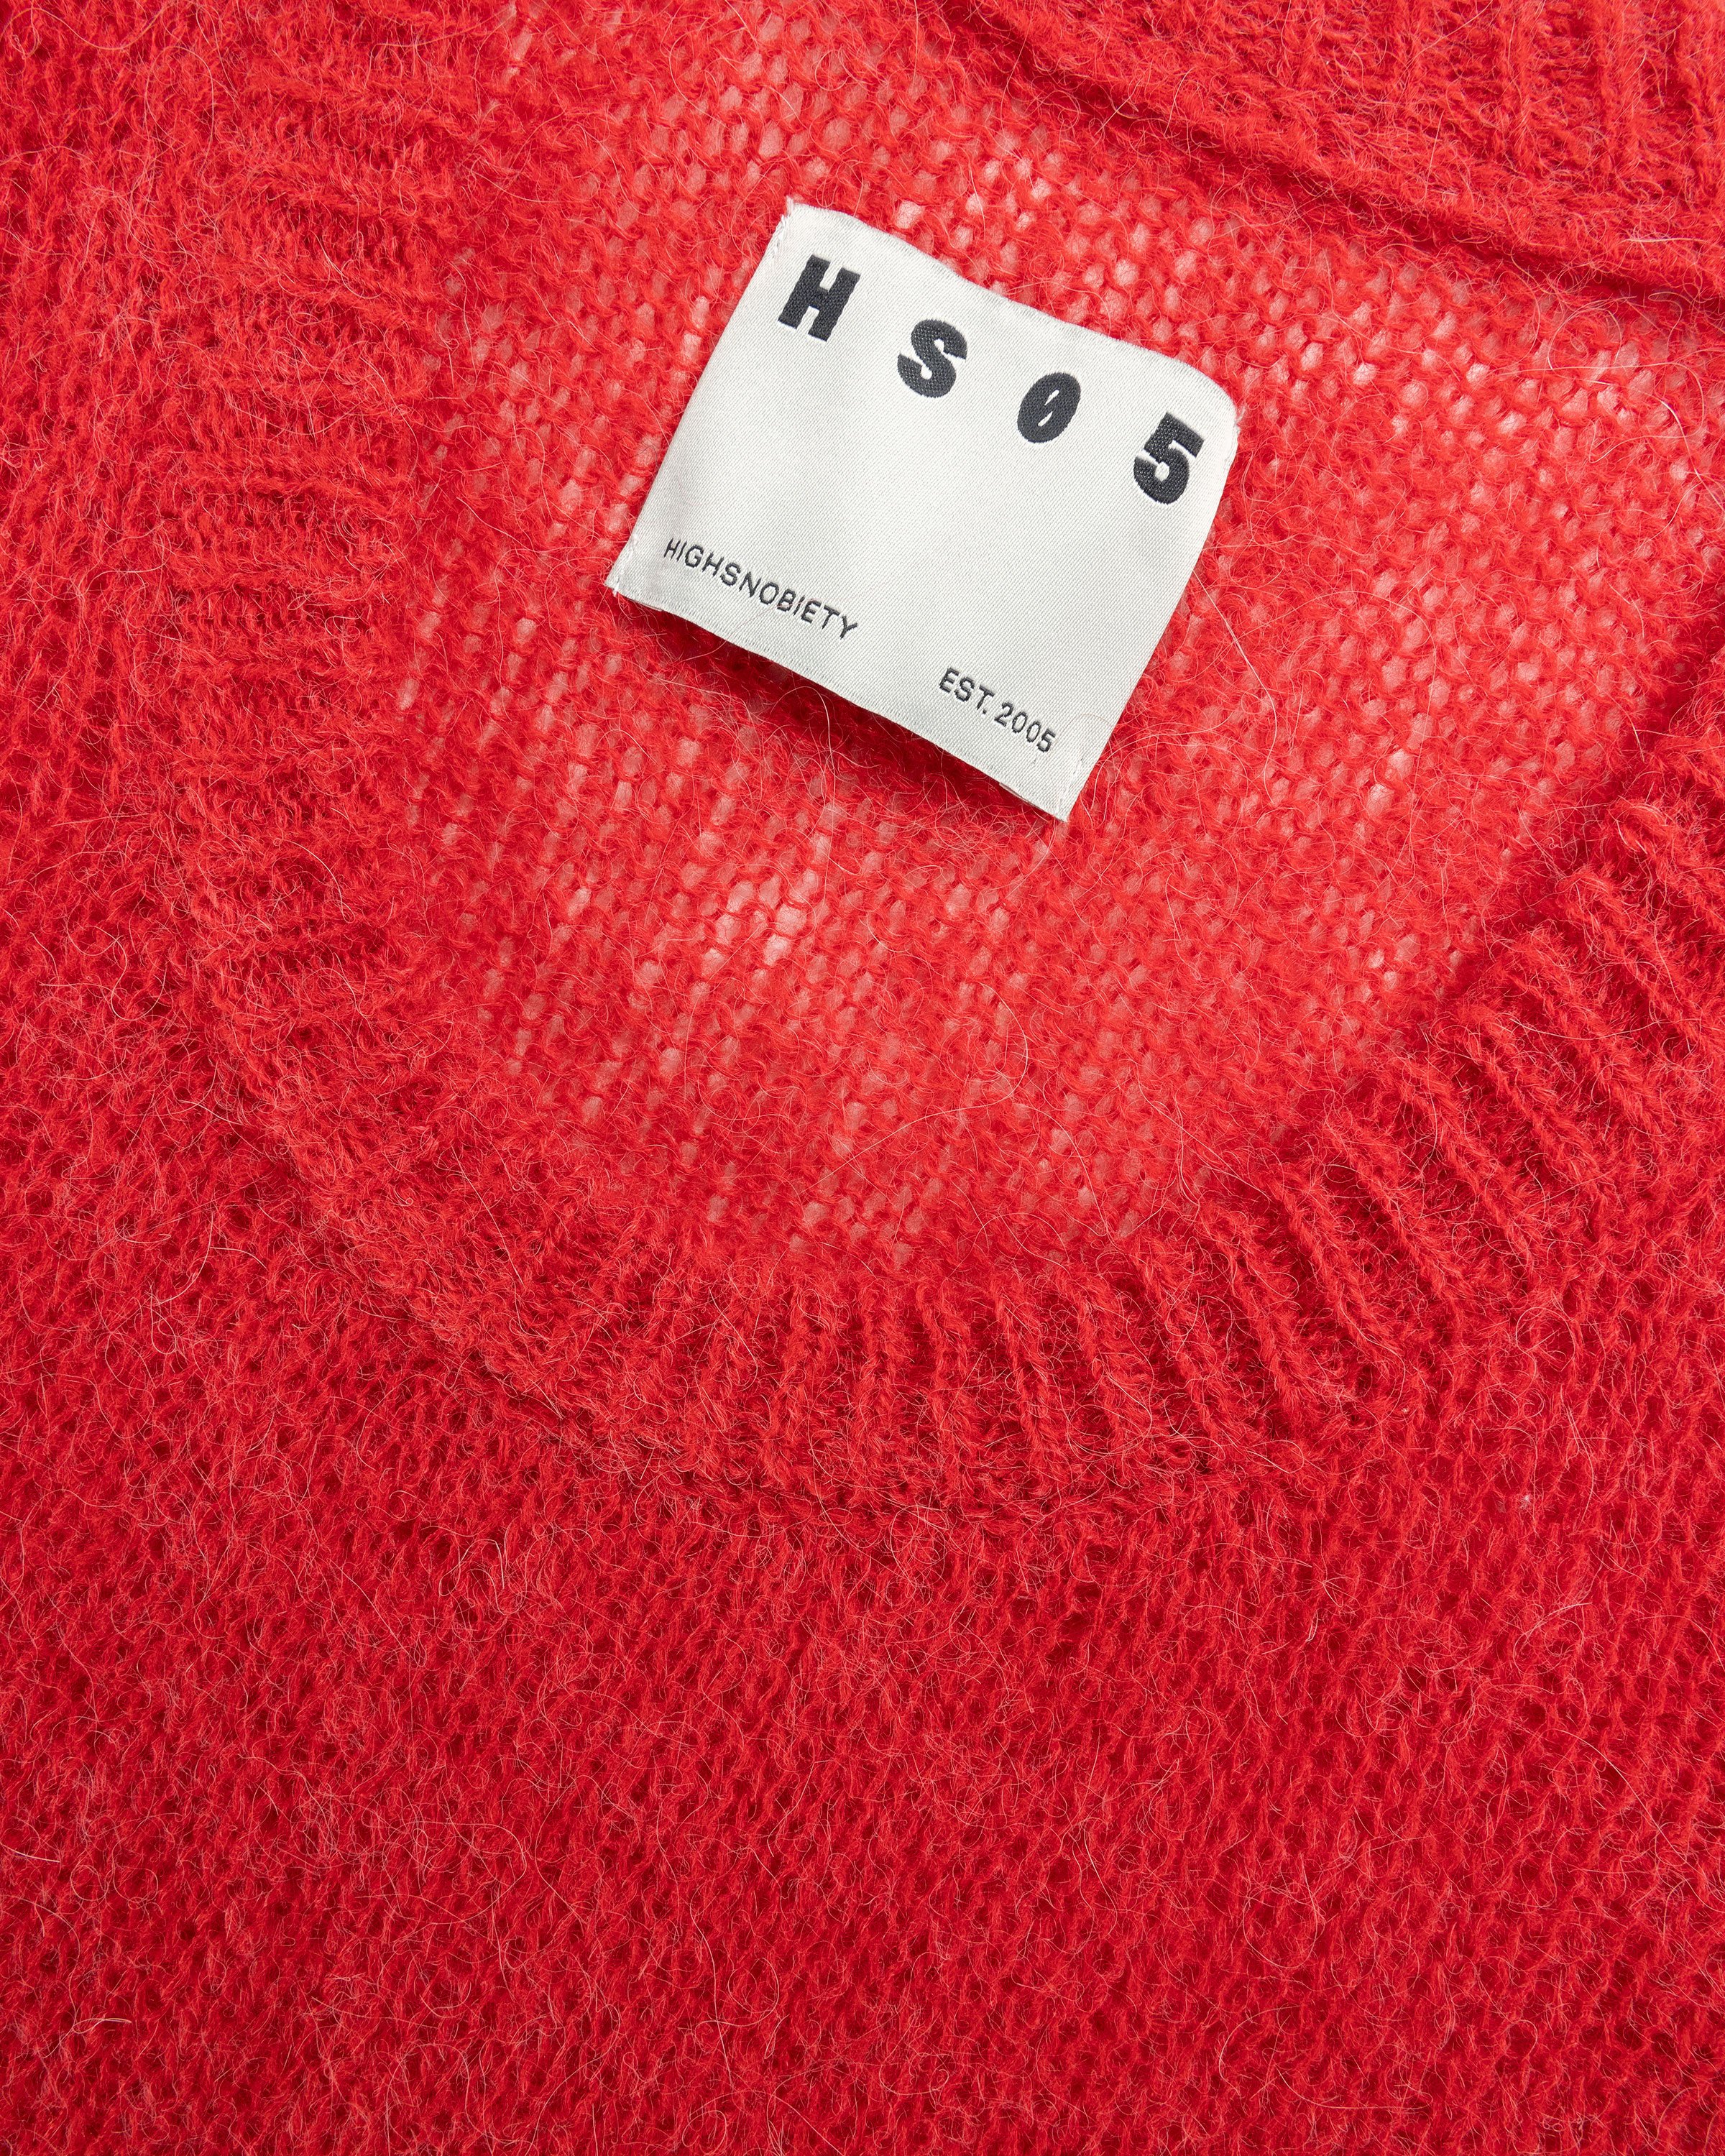 Highsnobiety HS05 - Loose Gage Tank Top Red - Clothing - Red - Image 8